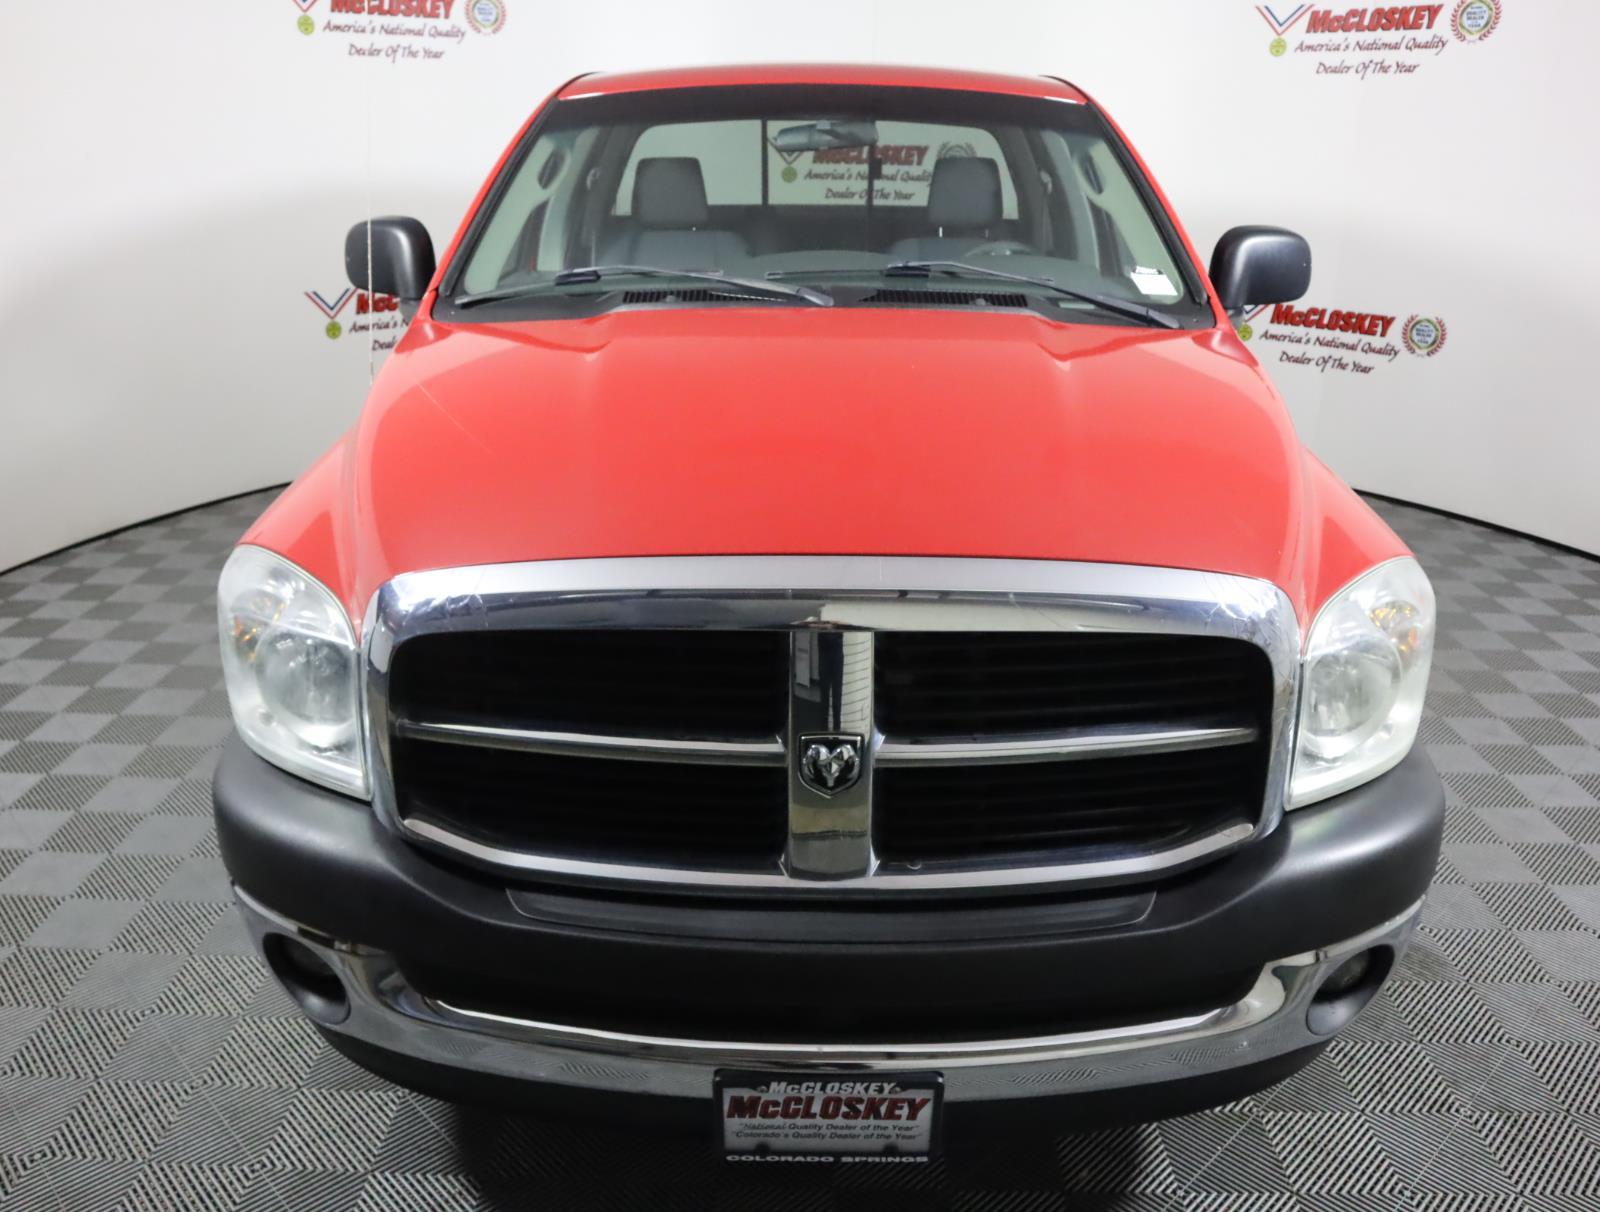 Preowned 2008 Dodge Ram SLT  V8! CREW CAB! for sale by McCloskey Imports & 4X4's in Colorado Springs, CO